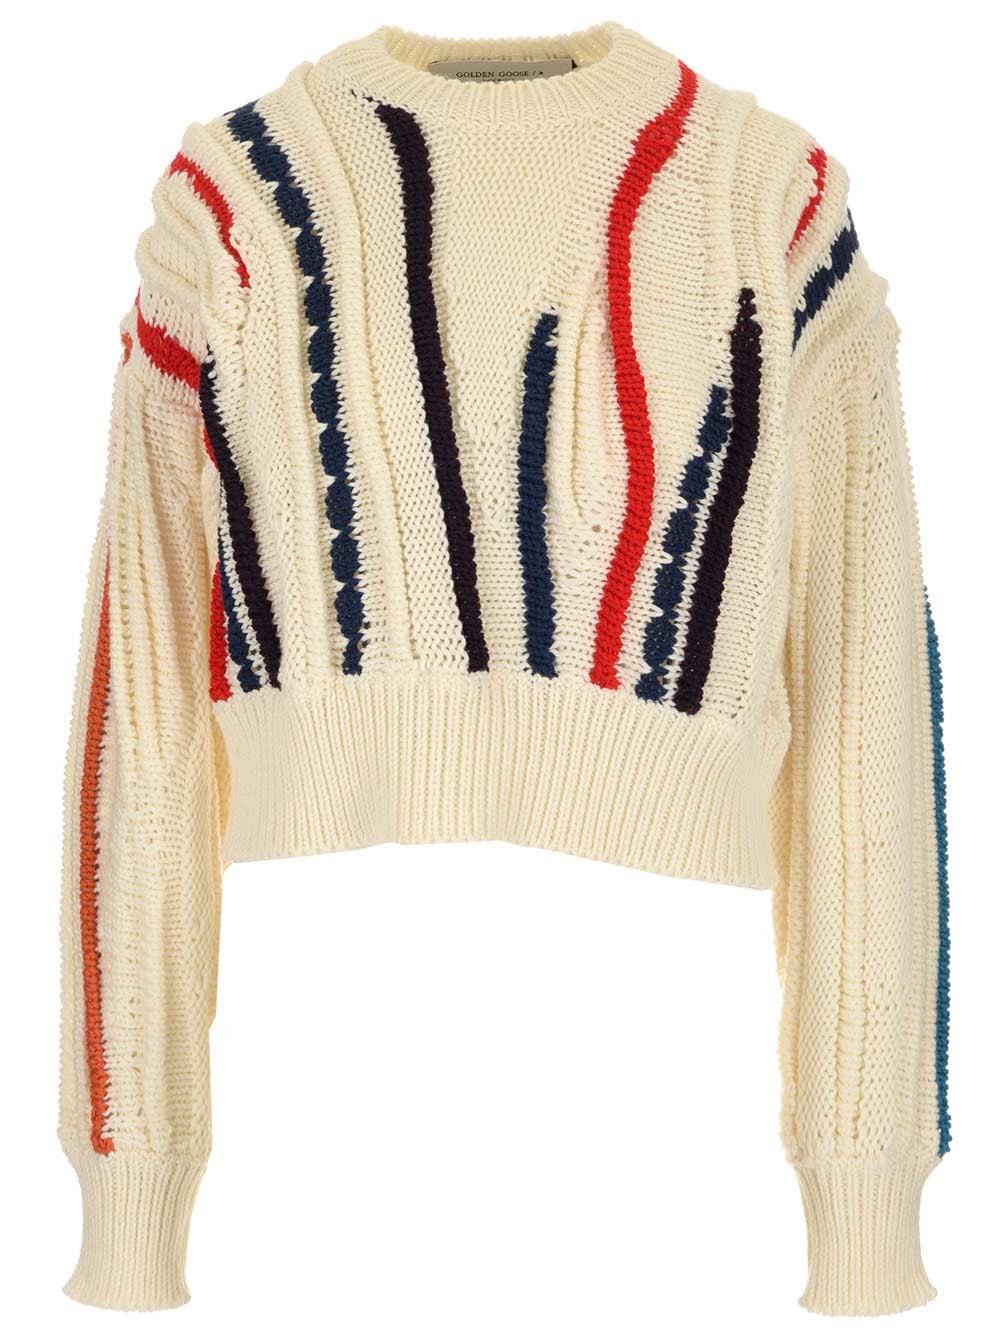 Golden Goose Striped Knit Sweater